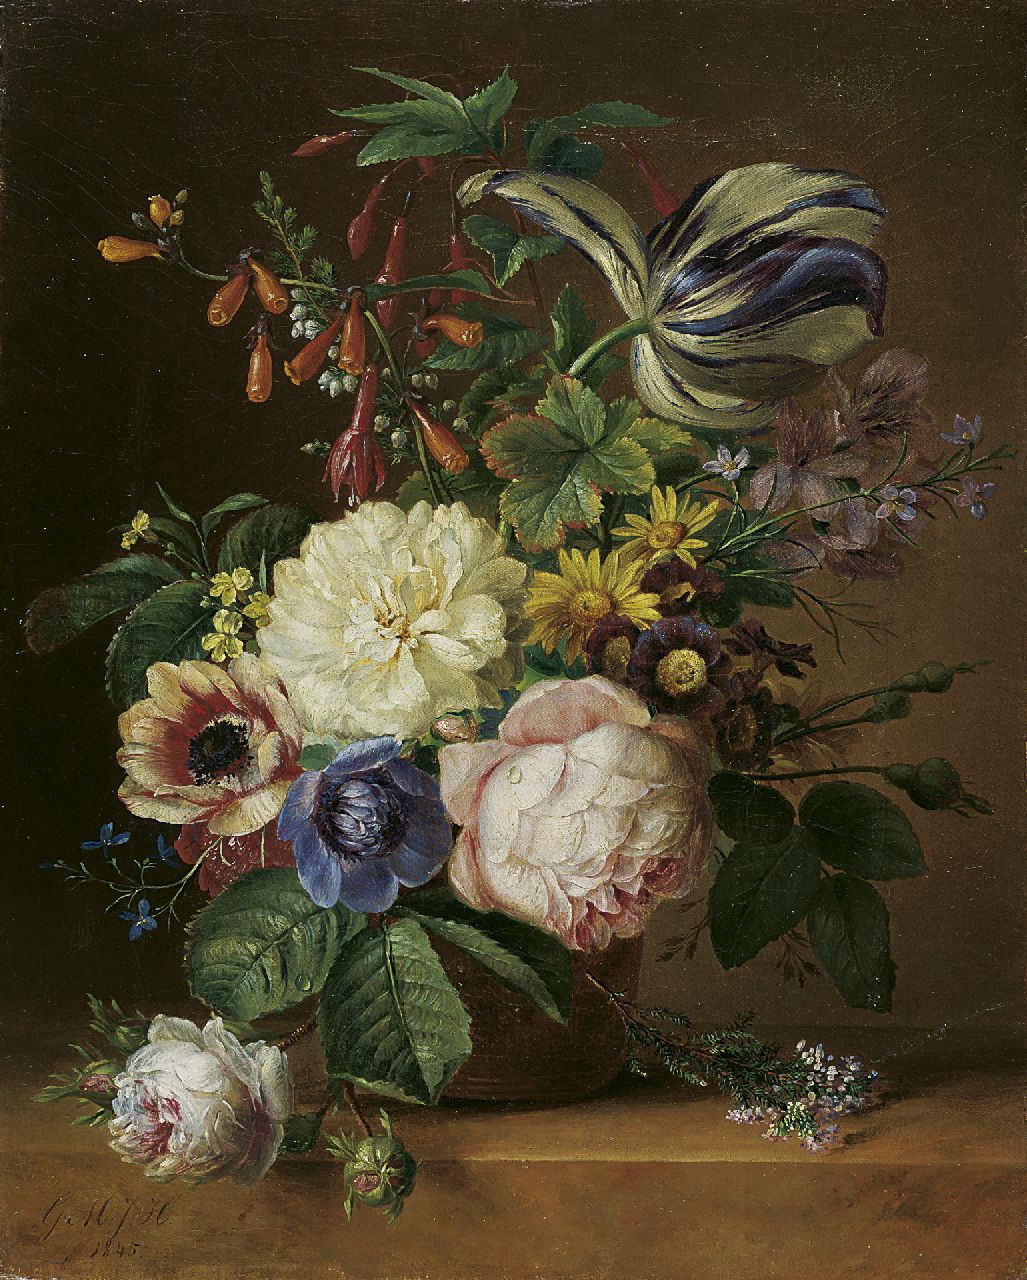 Huidekoper G.M.J.  | Geertruida Margaretha Jacoba Huidekoper, A still life of roses, tulips and anemones, oil on canvas 37.5 x 30.5 cm, signed l.l. with initials and dated 1845